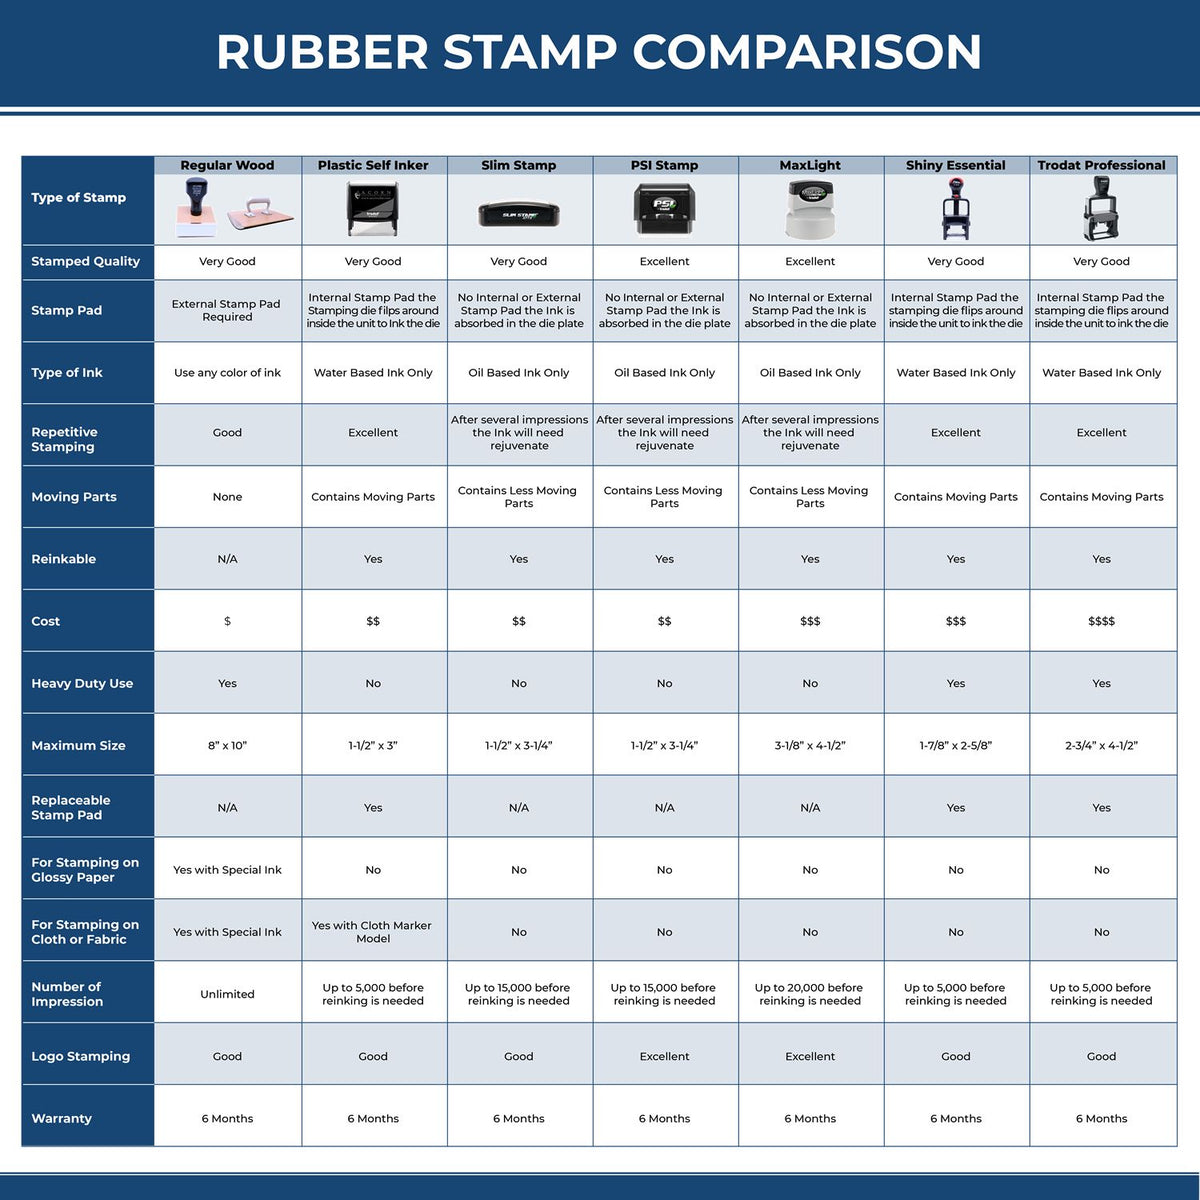 A comparison chart for the different types of mount models available for the Super Slim Texas Notary Public Stamp.